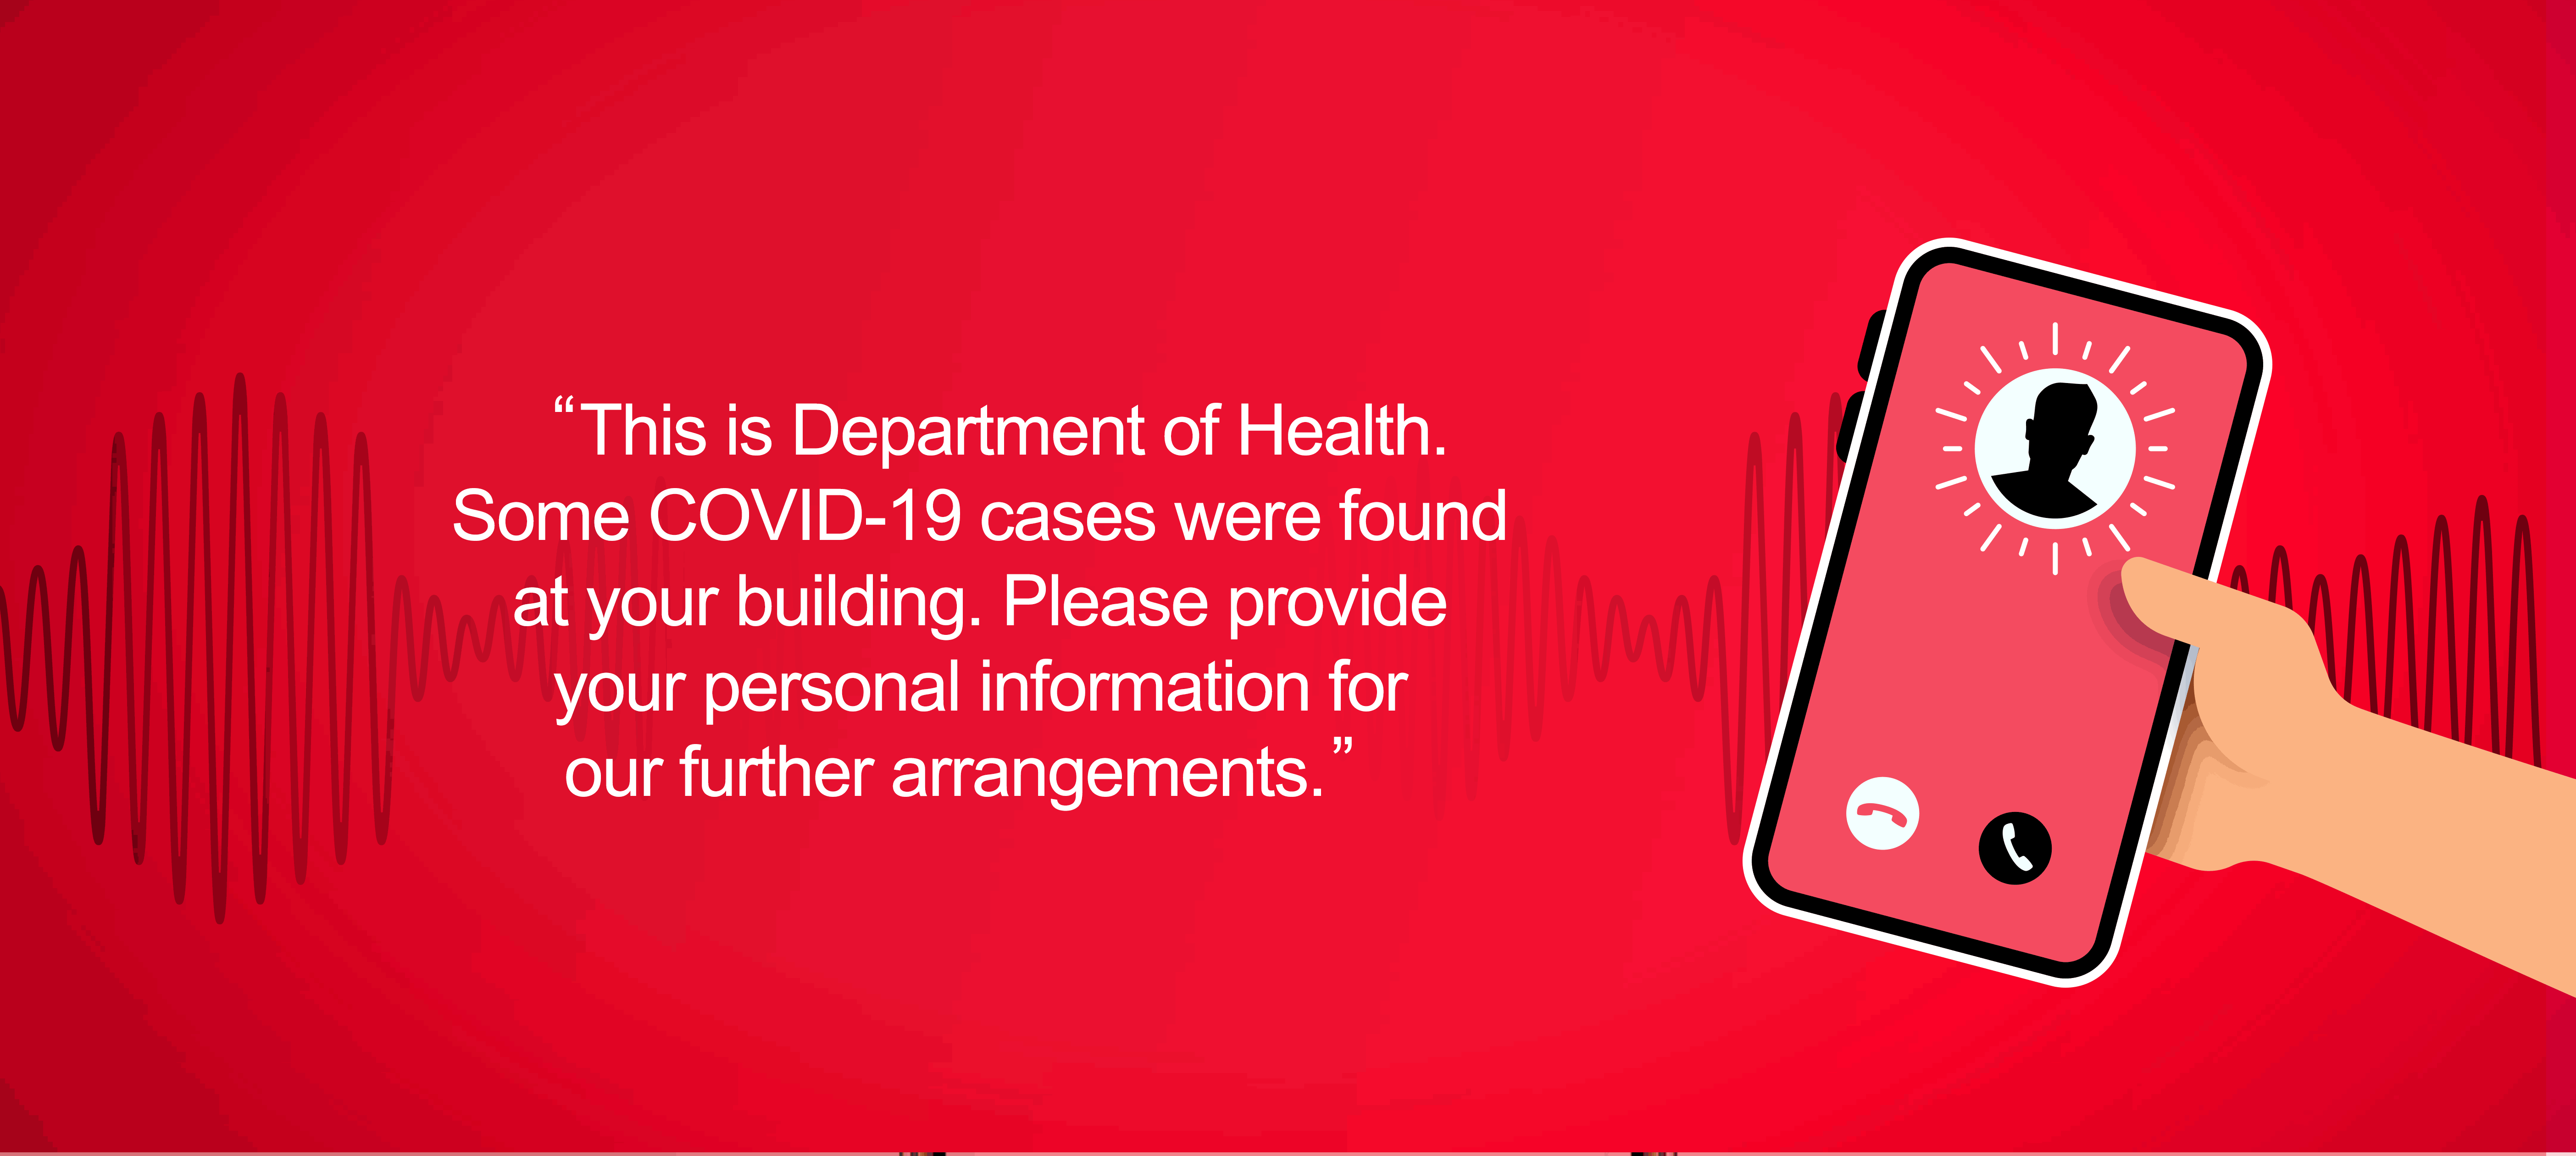 Example of a COVID-19 scam. Fraudster impersonates staff from the Department of Health, asking the target to provide personal information for further arrangement due to confirmed cases found in the building he lives in.